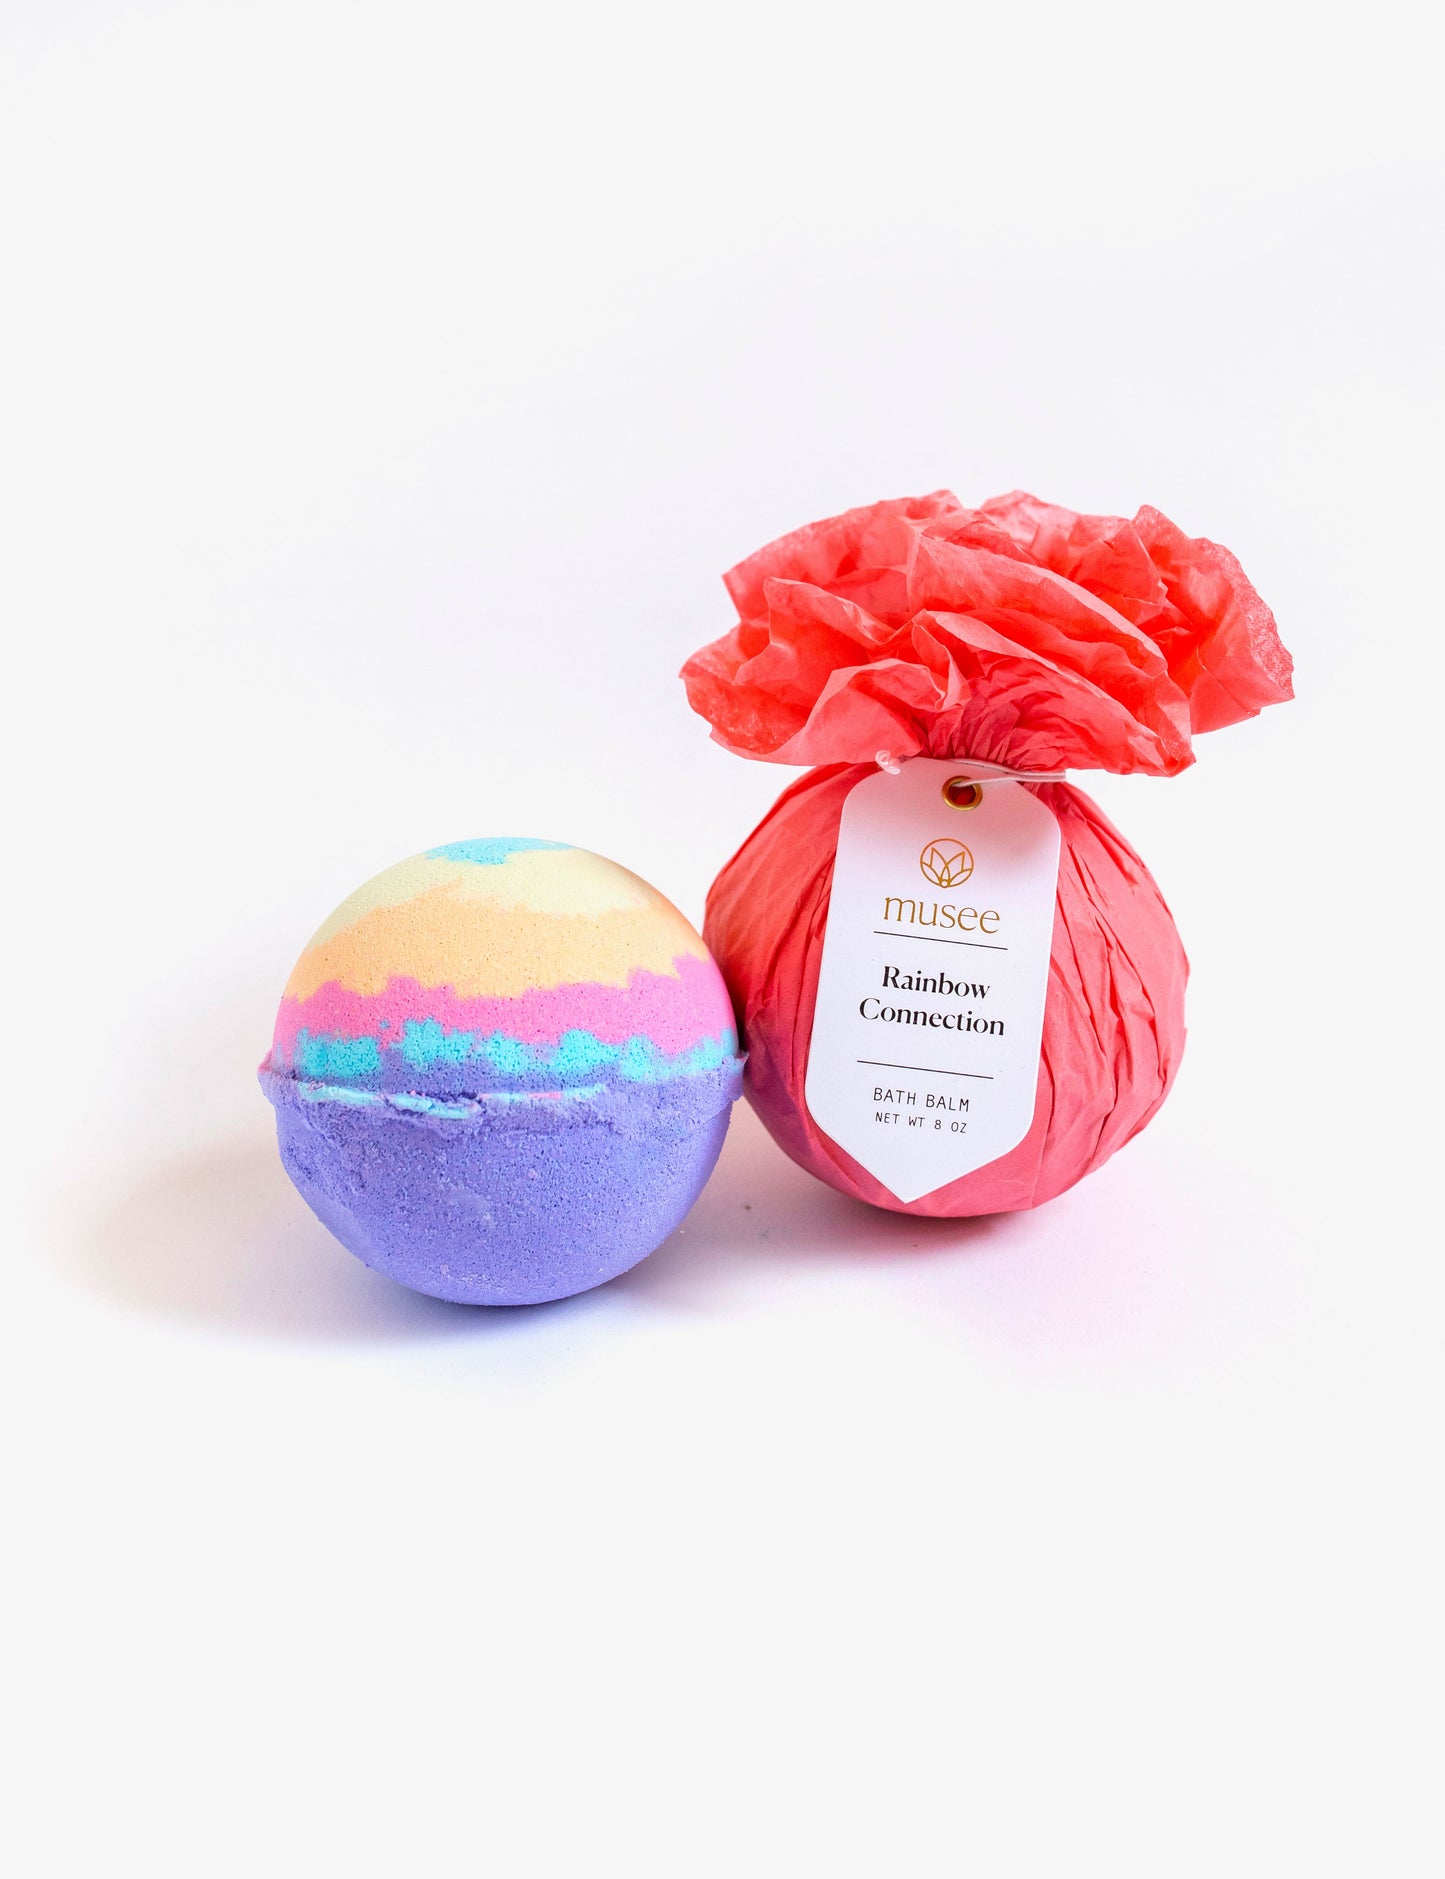 Musee Bath Bomb Bath & Body in Rainbow Connection at Wrapsody